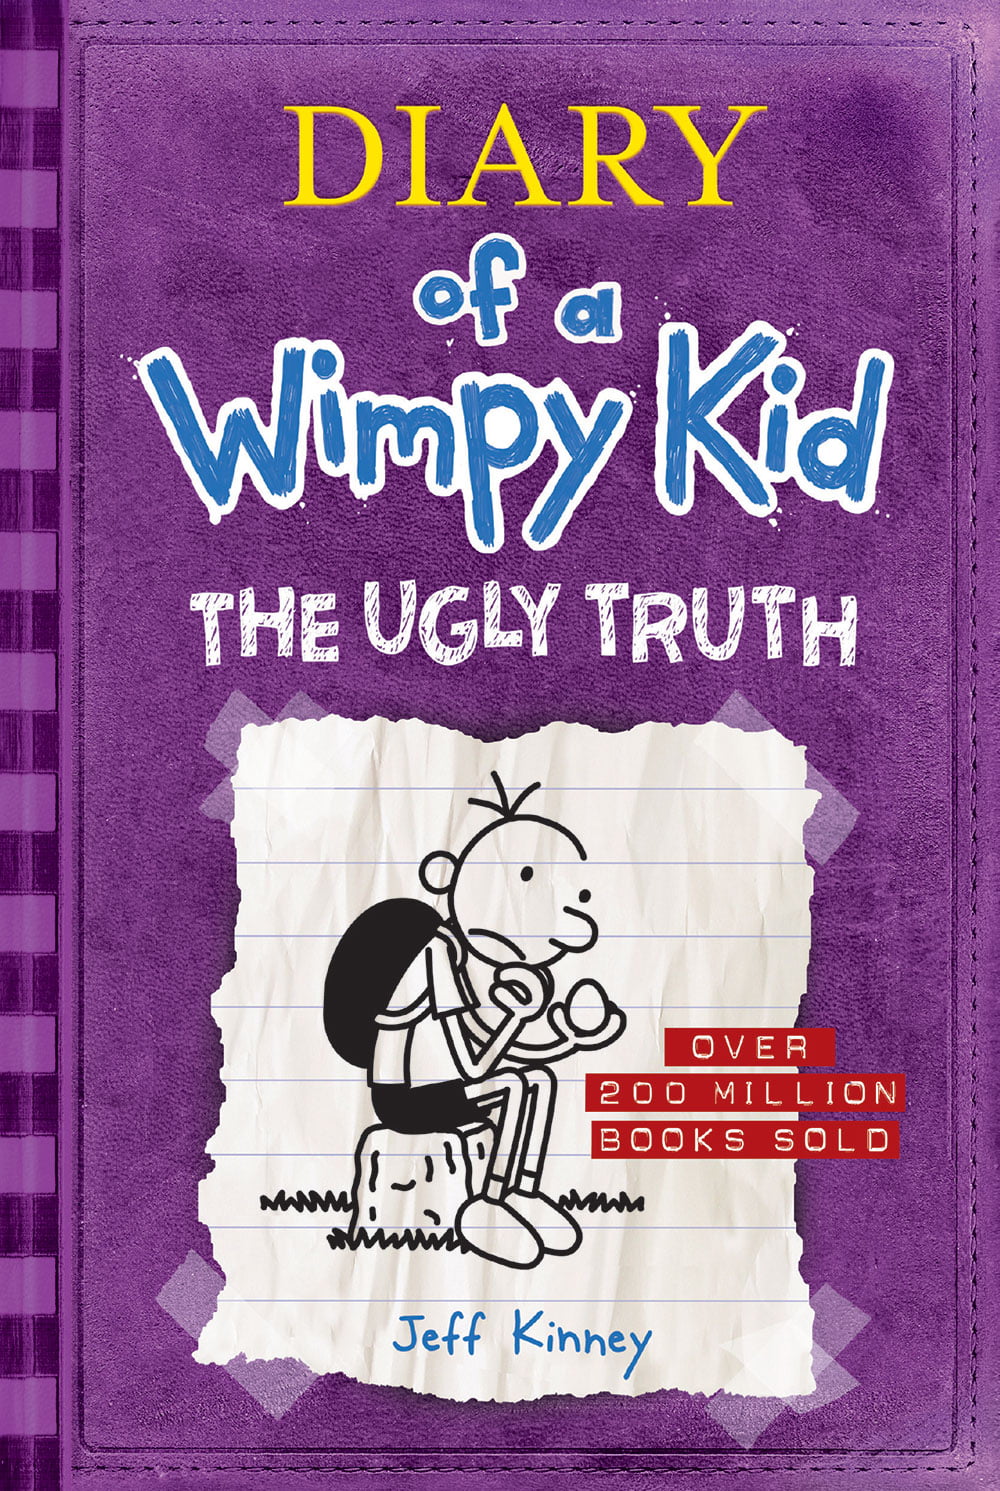 book review on diary of a wimpy kid